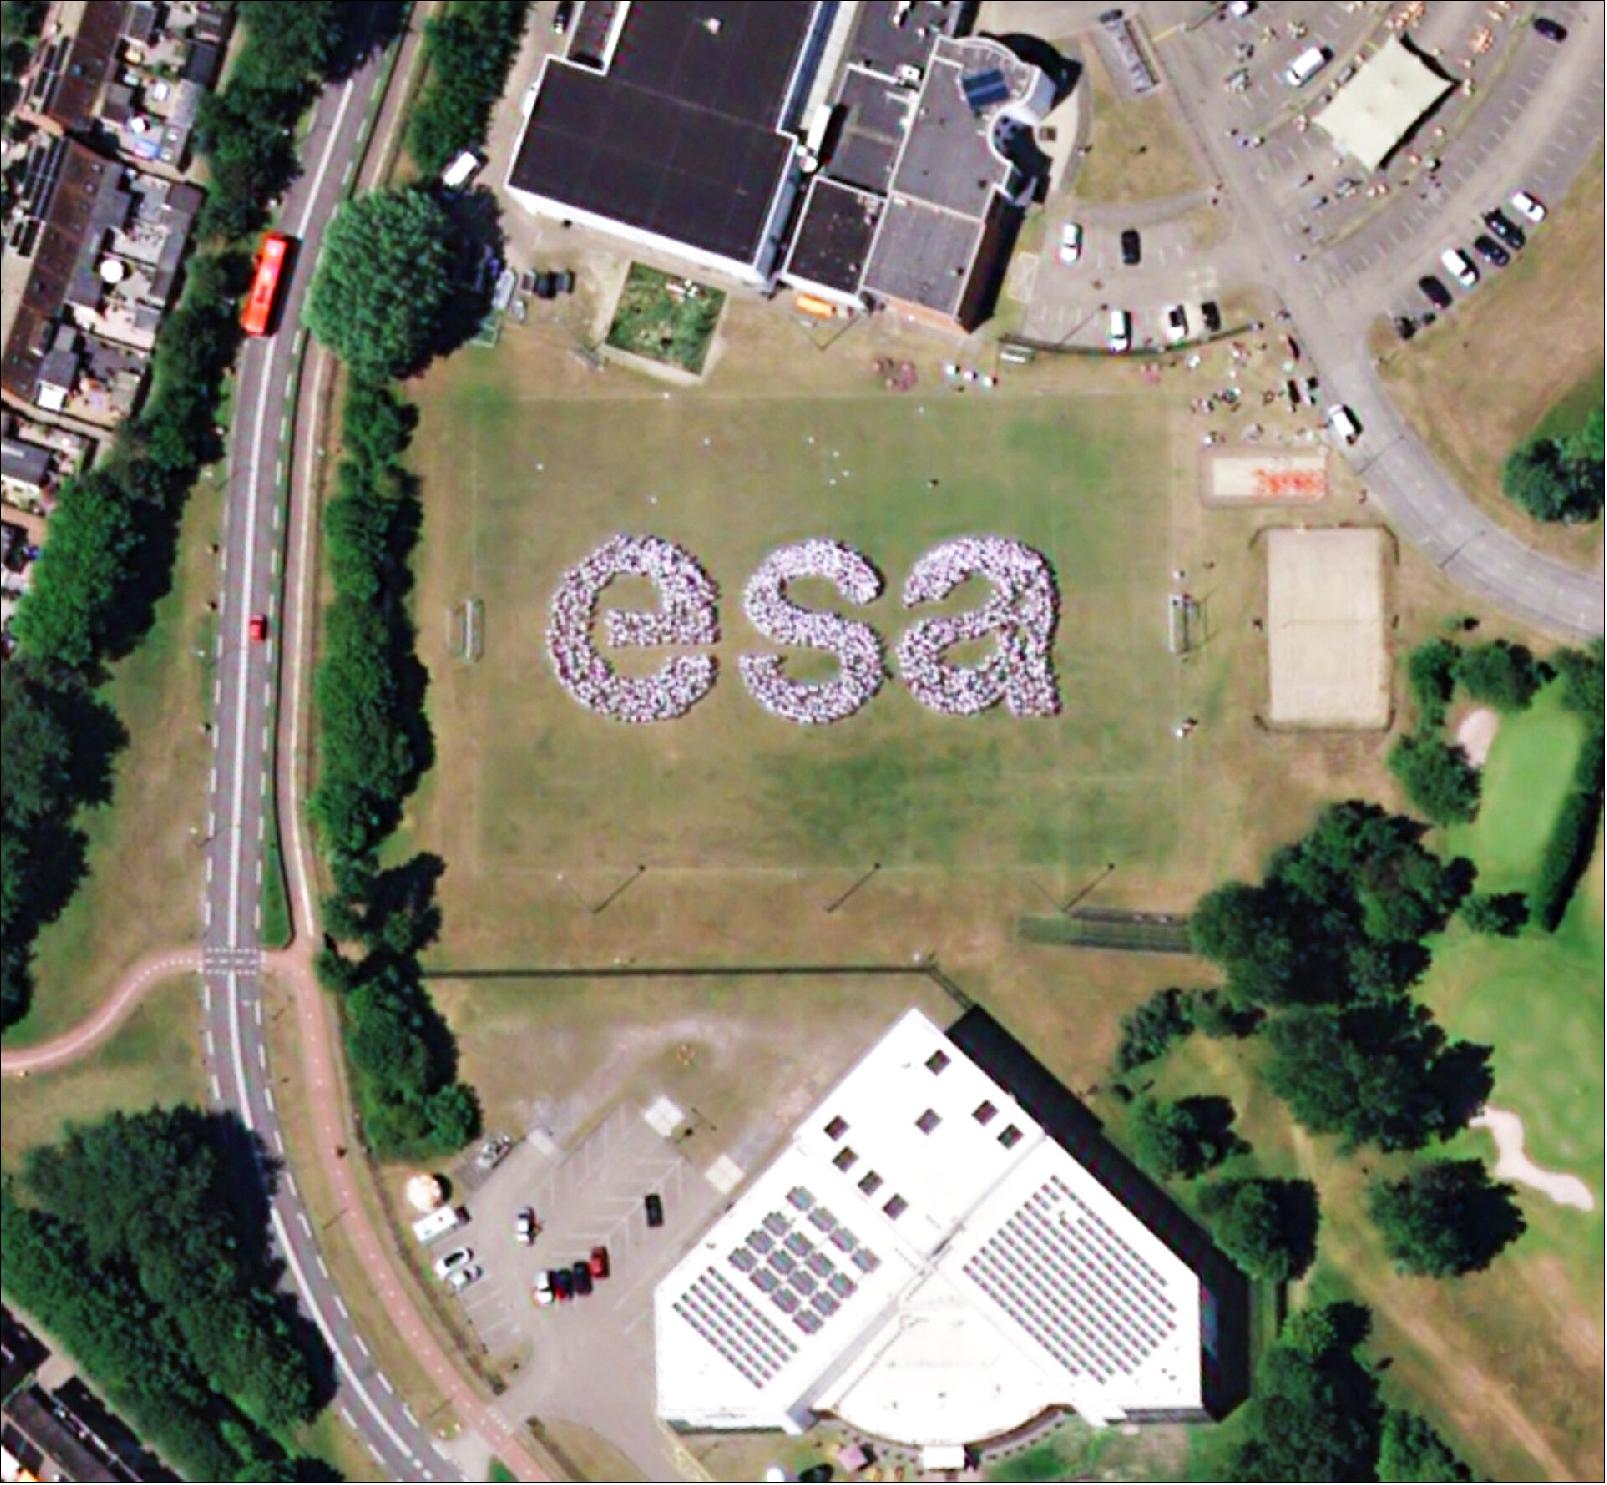 Figure 11: People gathered on ESTEC’s rugby field in the run-up to the satellite pass, holding white sheets of paper over their heads to make them stand out against the green grass around them (image credit: ESA)